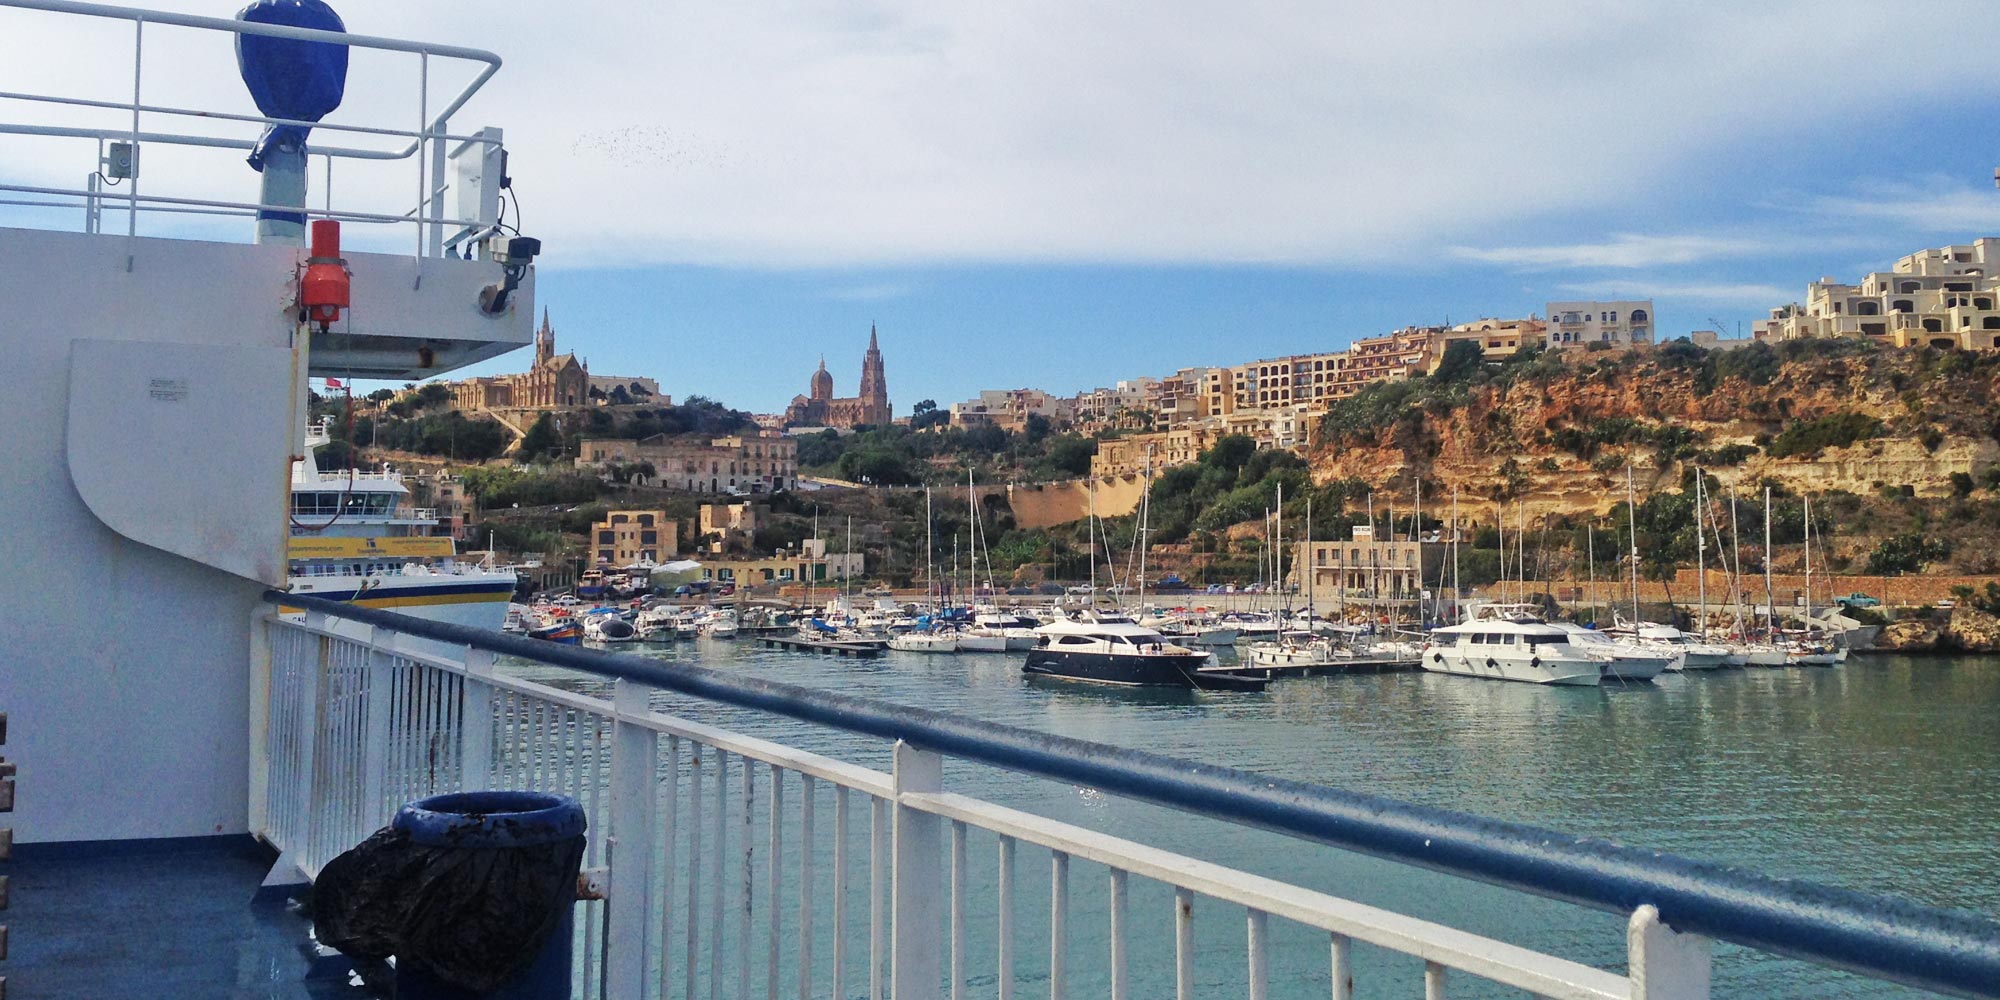 Malta is ranked first in Europe on the Rainbow Europe ranking 2023